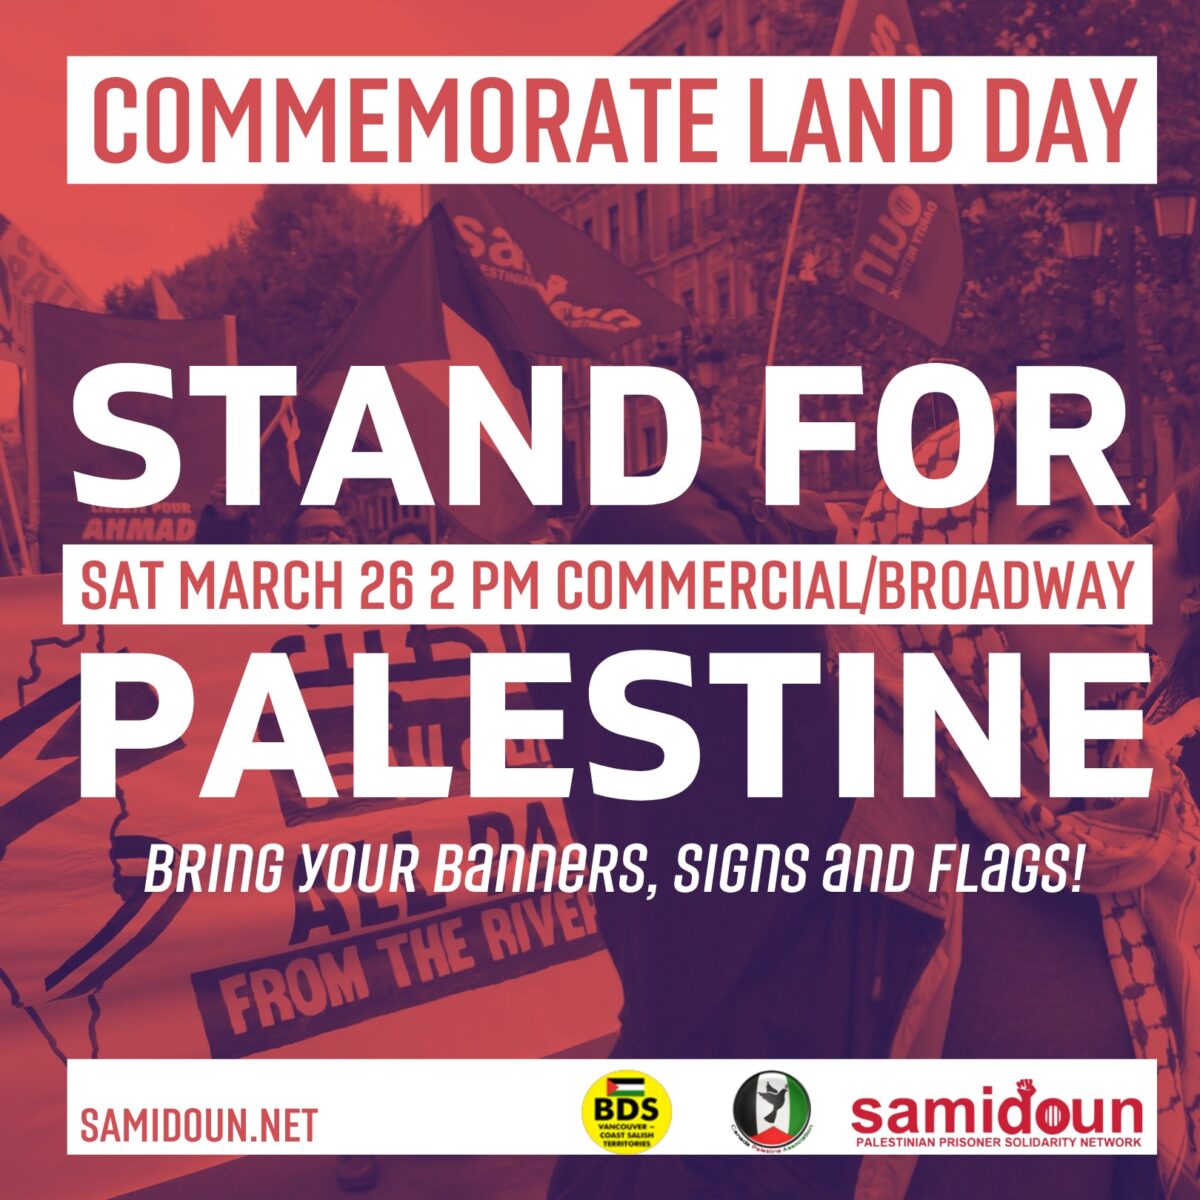 Stand for Palestine: Commemorate Land Day!